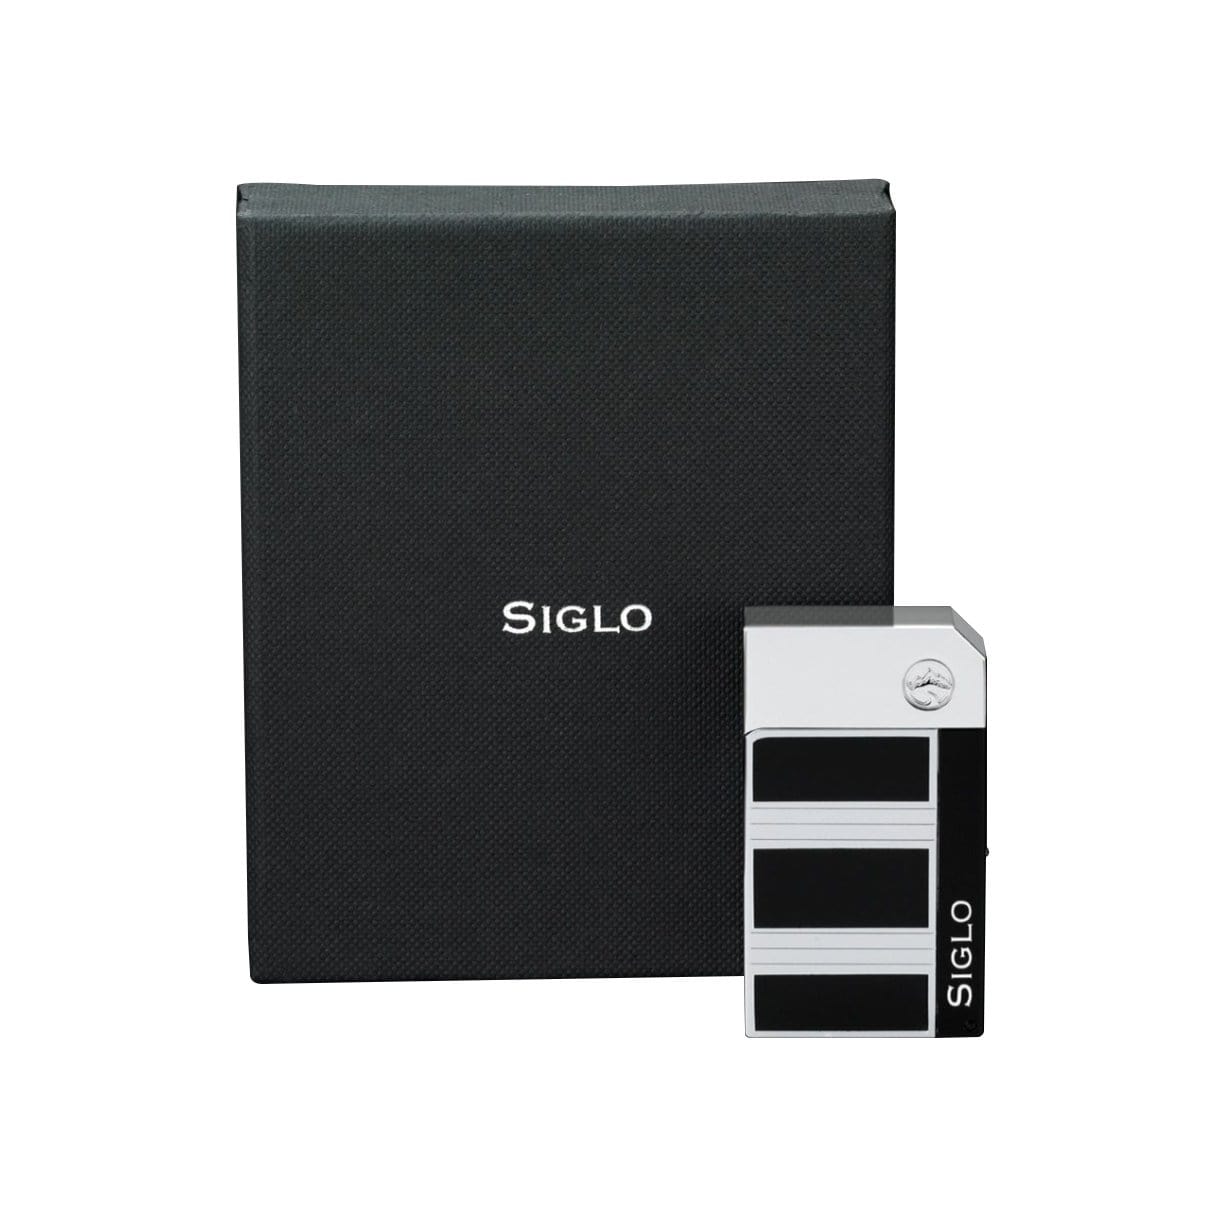 SIGLO ACCESSORIES SIGLO HIGH ALTITUDE OBSIDIAN CHROME LIGHTER